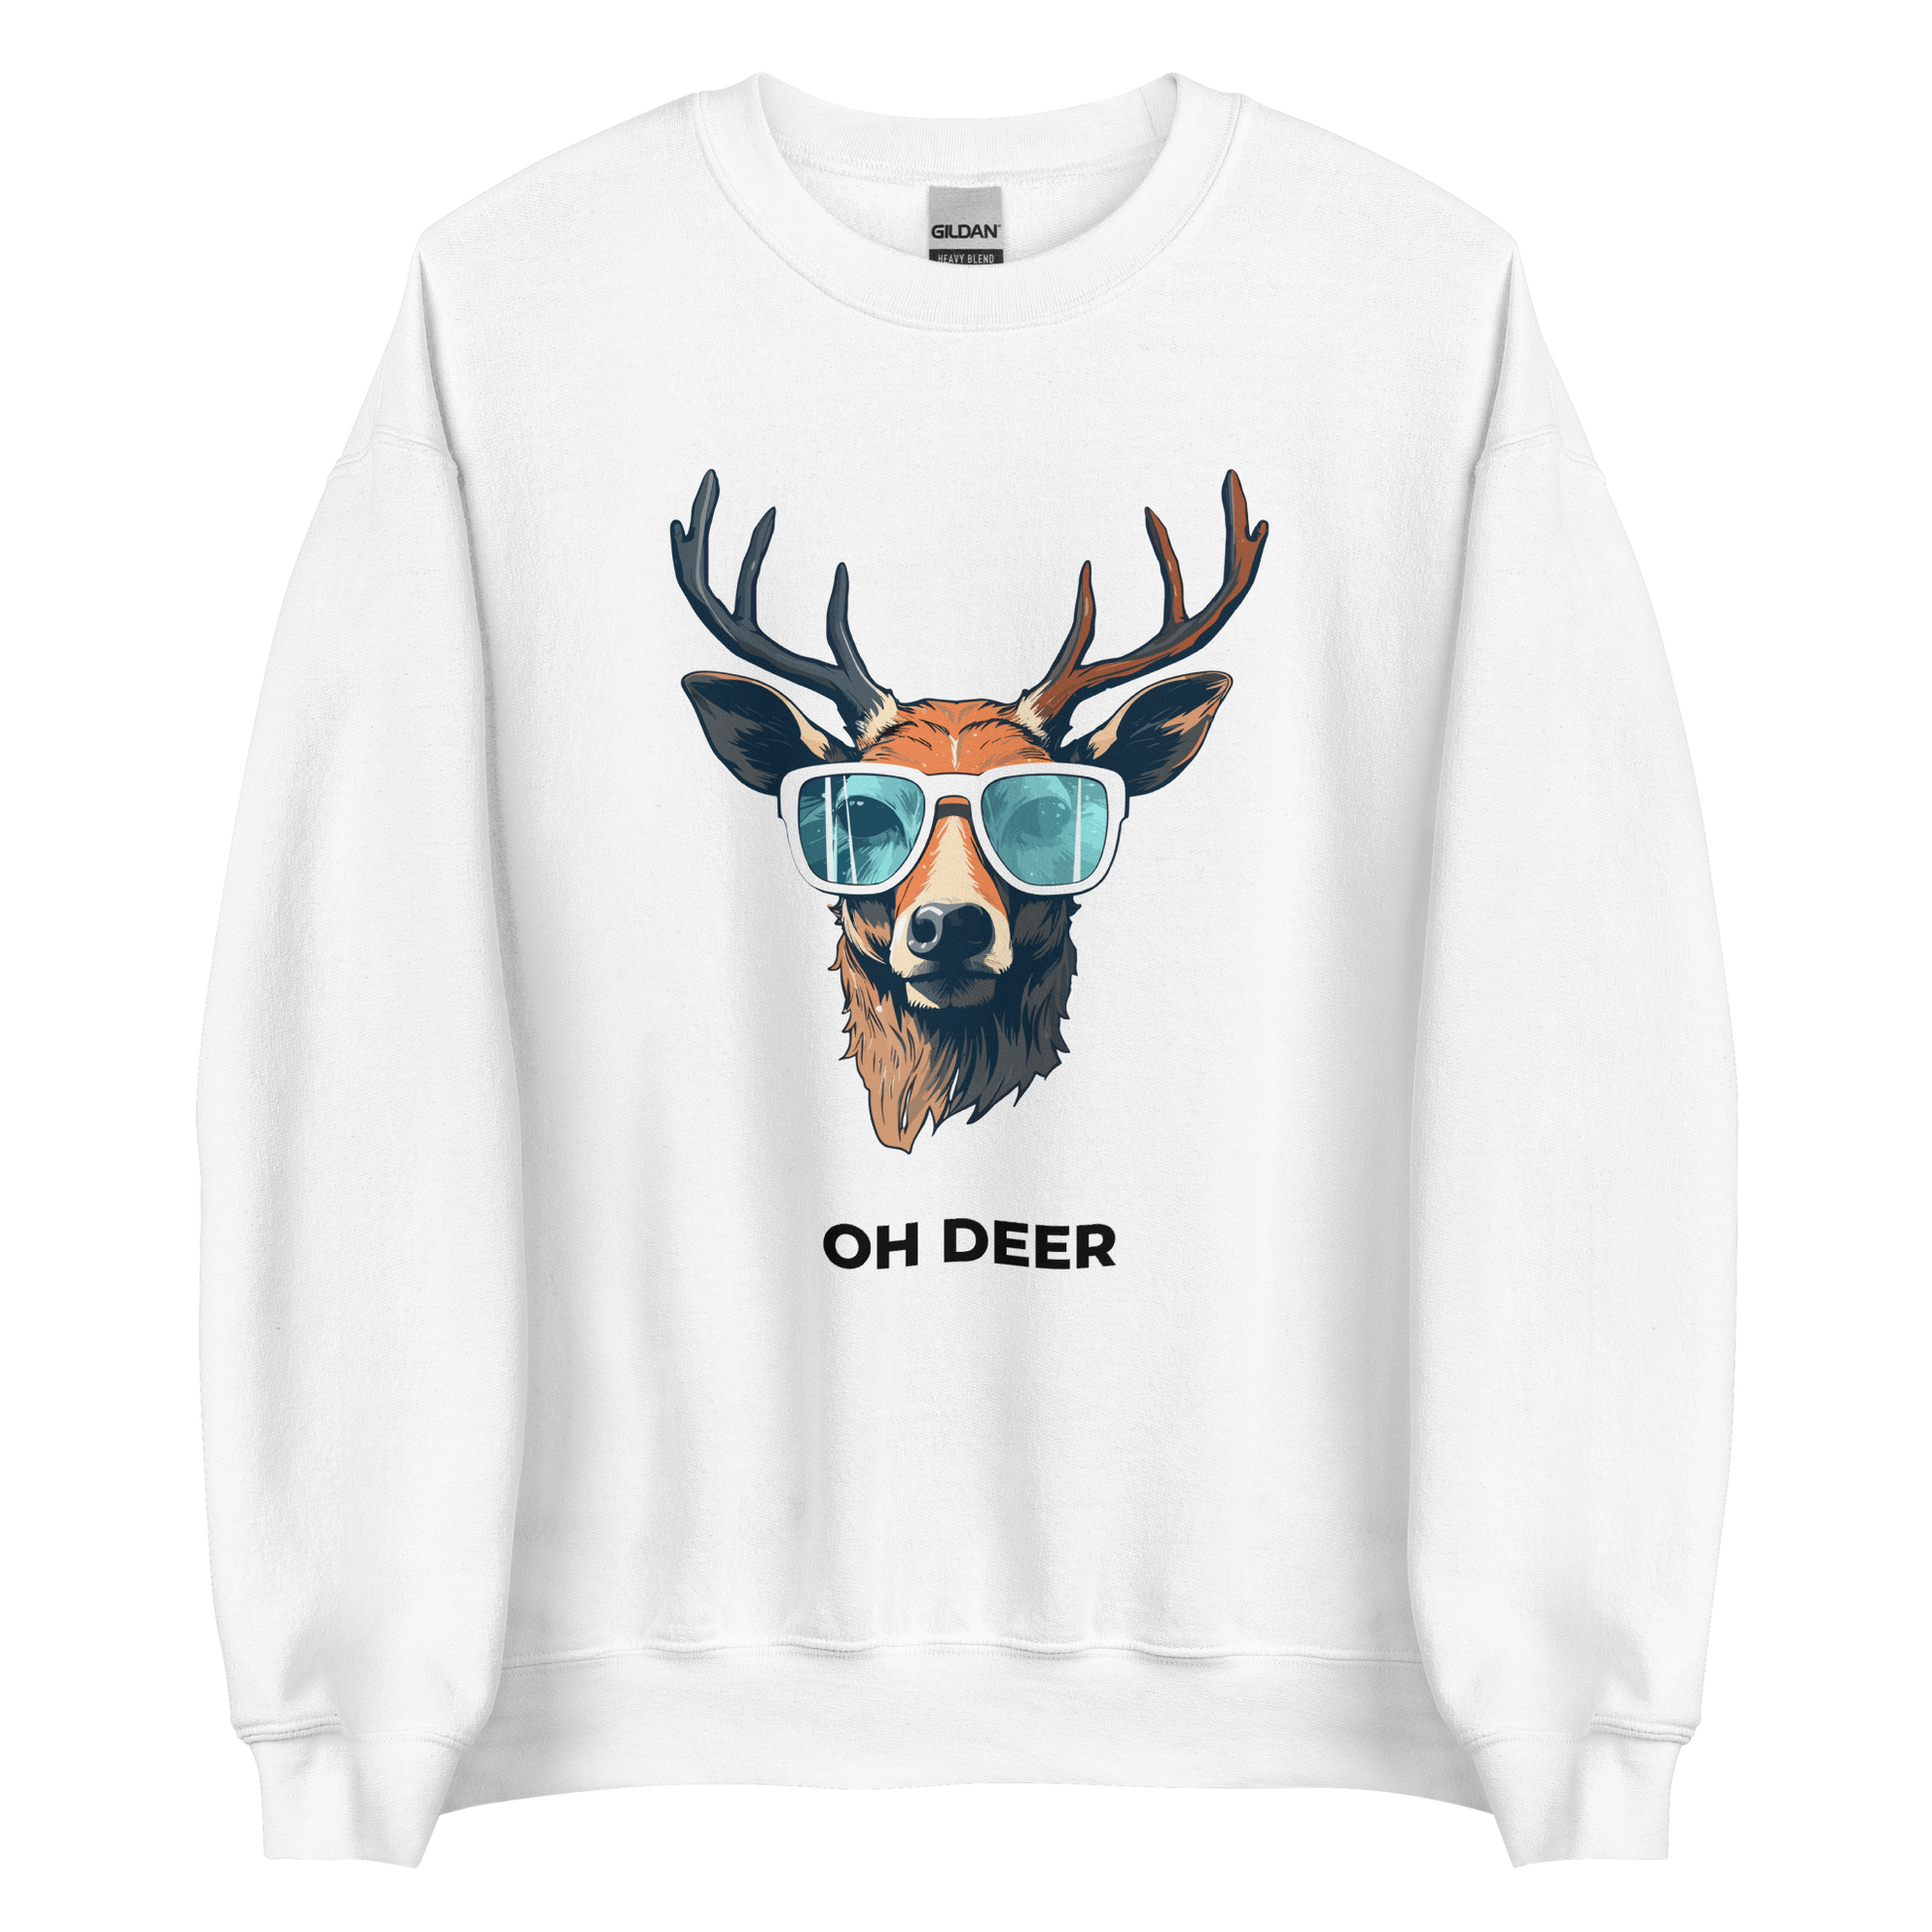 White Deer Sweatshirt featuring a hilarious Oh Deer graphic on the chest - Funny Graphic Deer Sweatshirts - Boozy Fox